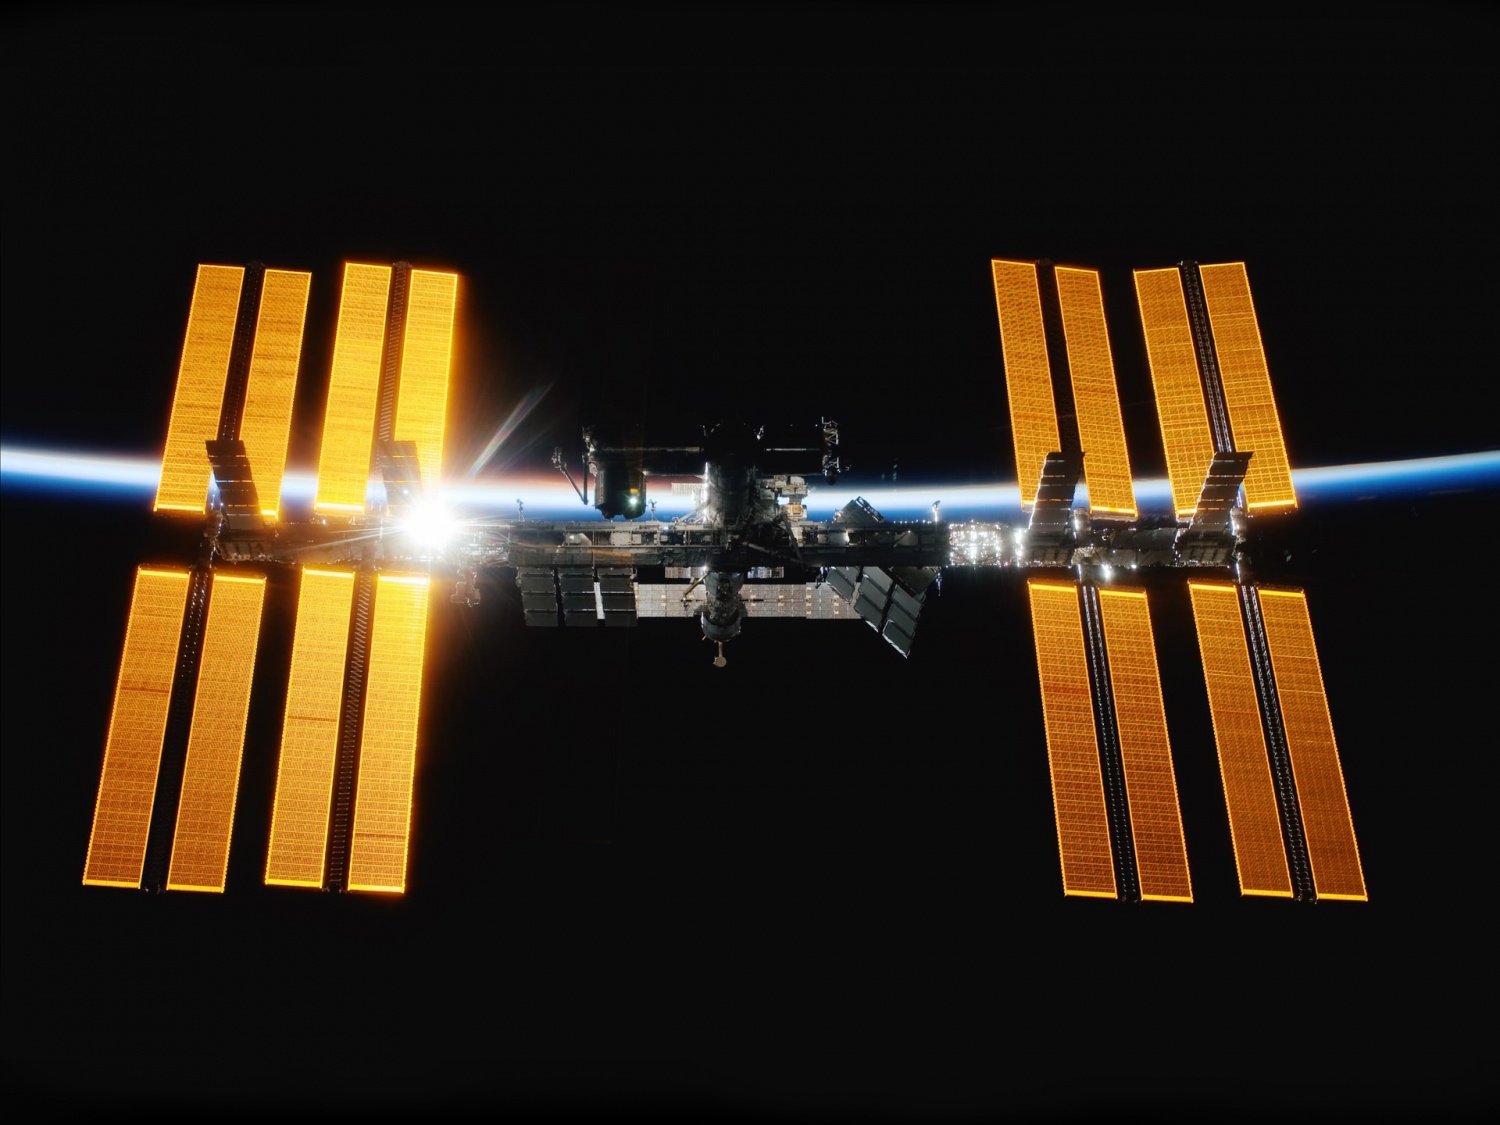 International Space Station Live Update: Full Details of Scary Accident That Risked 'Breakup'